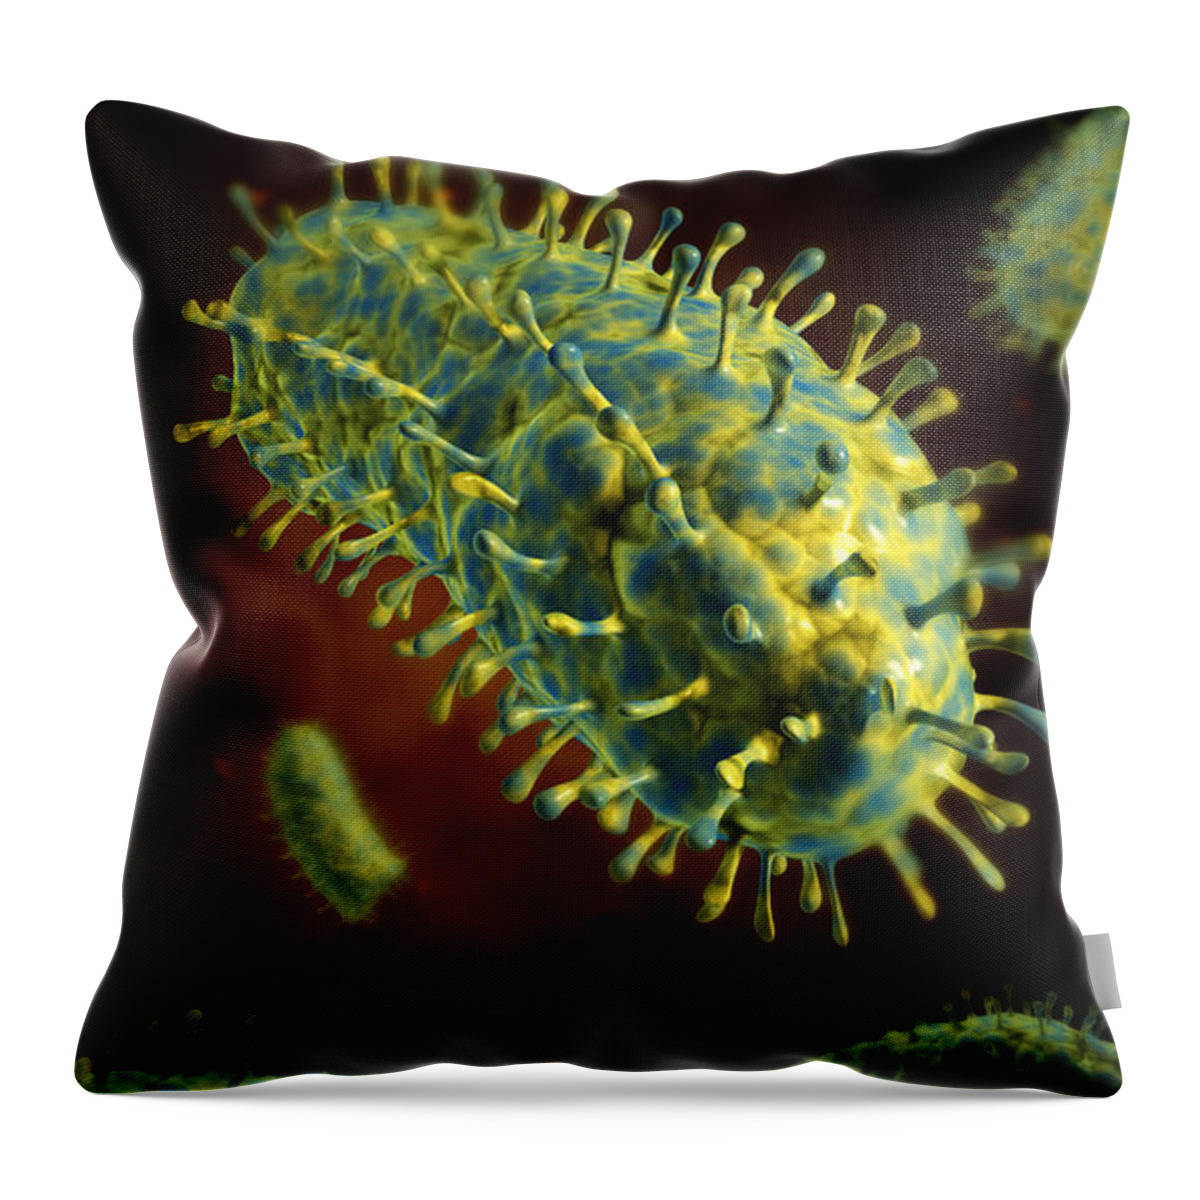 Vertical Throw Pillow featuring the digital art Conceptual Image Of Rabies Virus #1 by Stocktrek Images